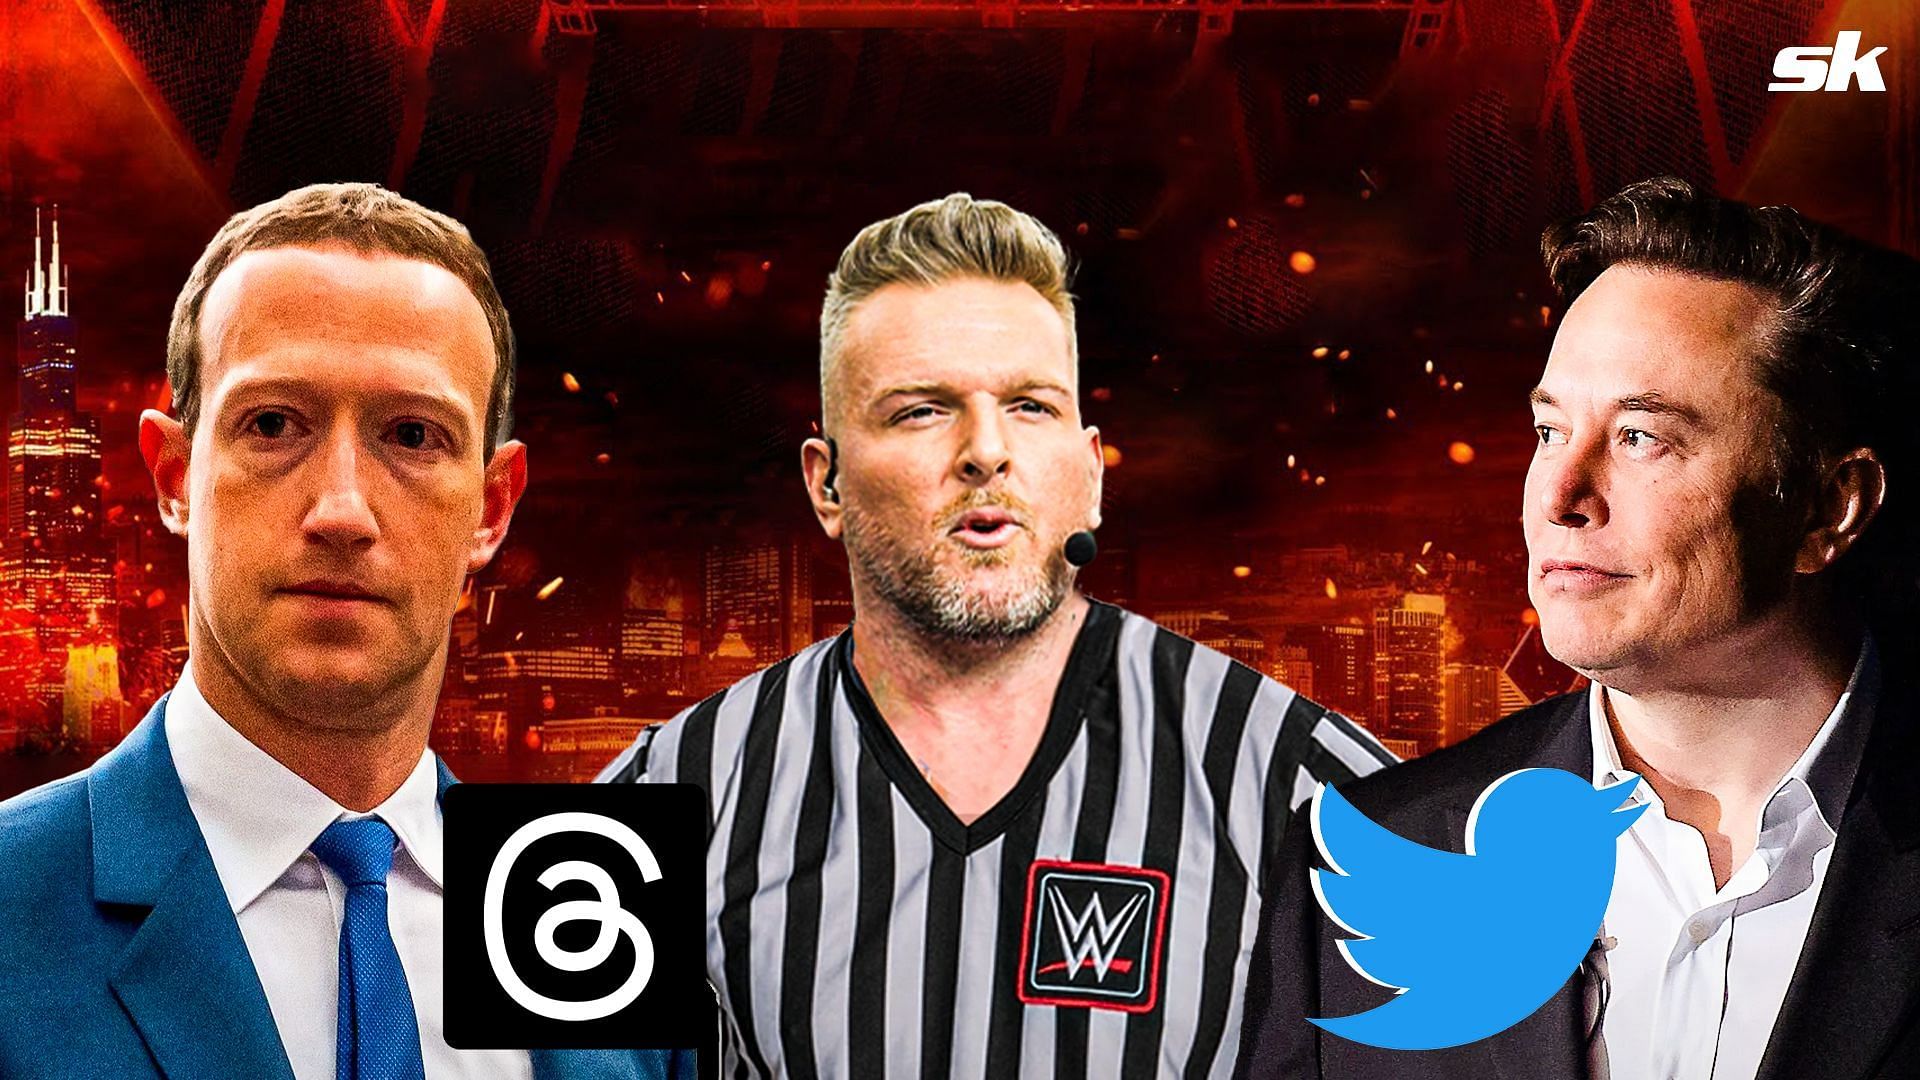 Pat McAfee steps in to speak about Twitter vs Threads